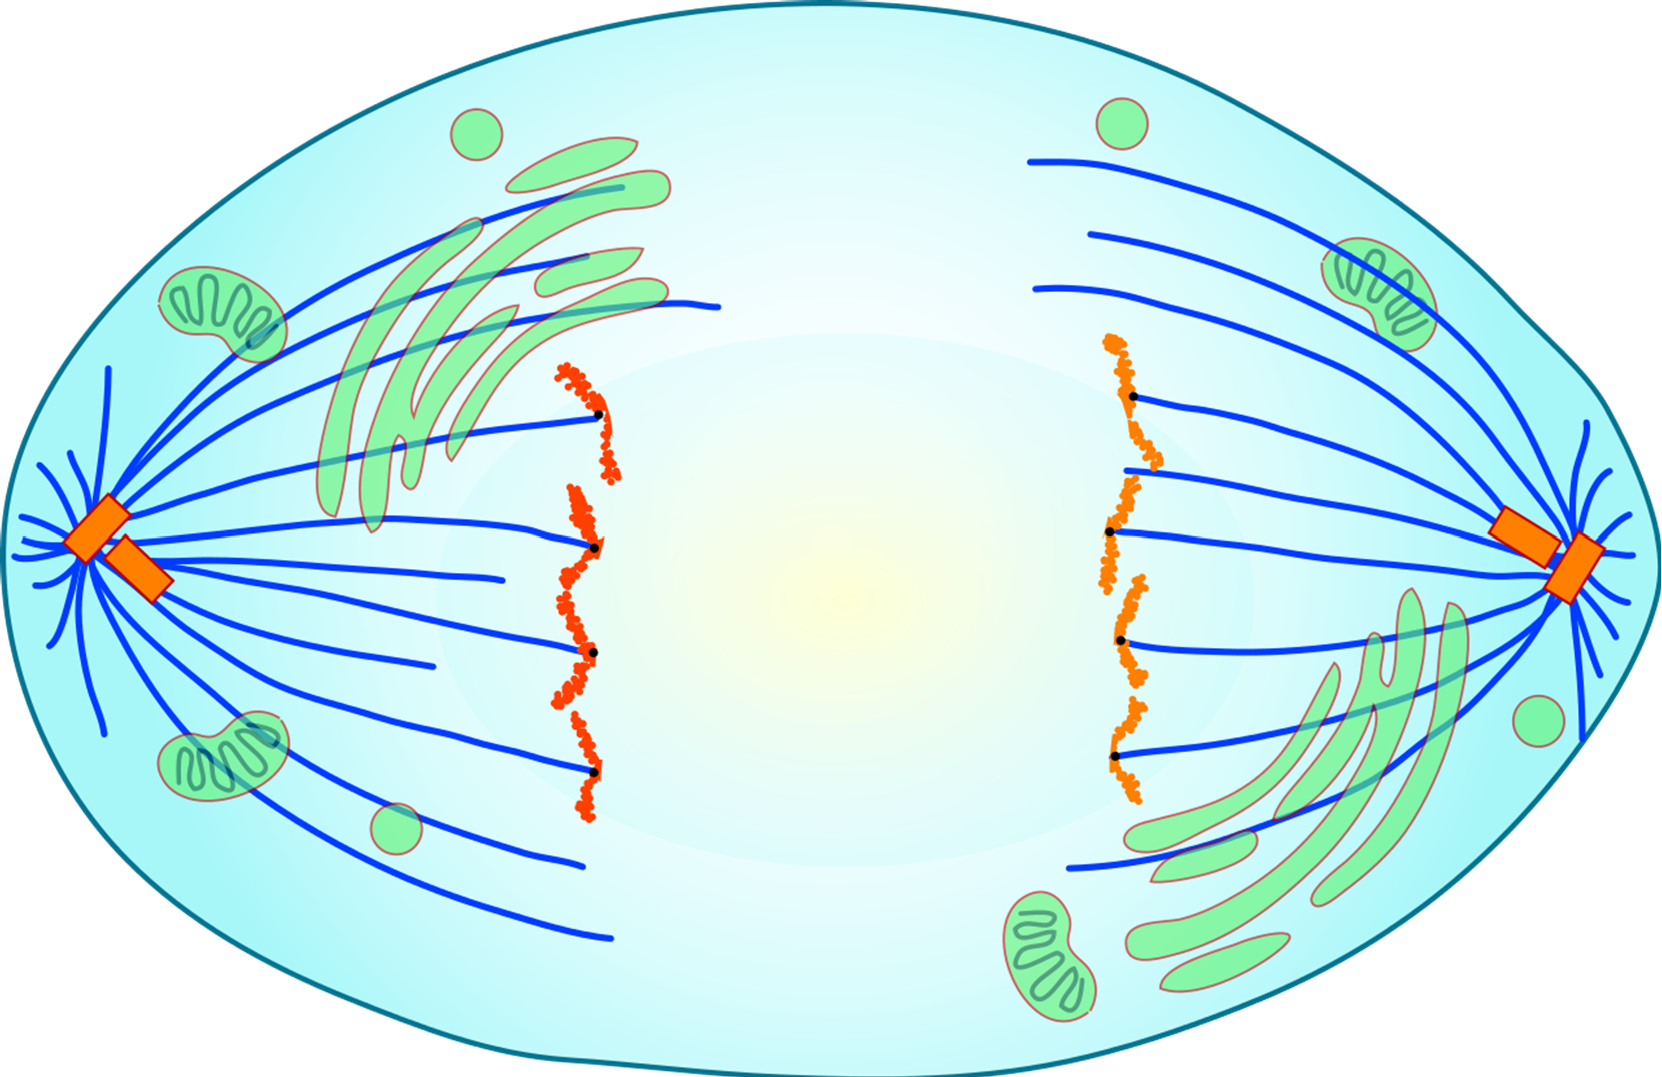 4.3 Mitotic Cell Division Division of the Nucleus (Mitosis